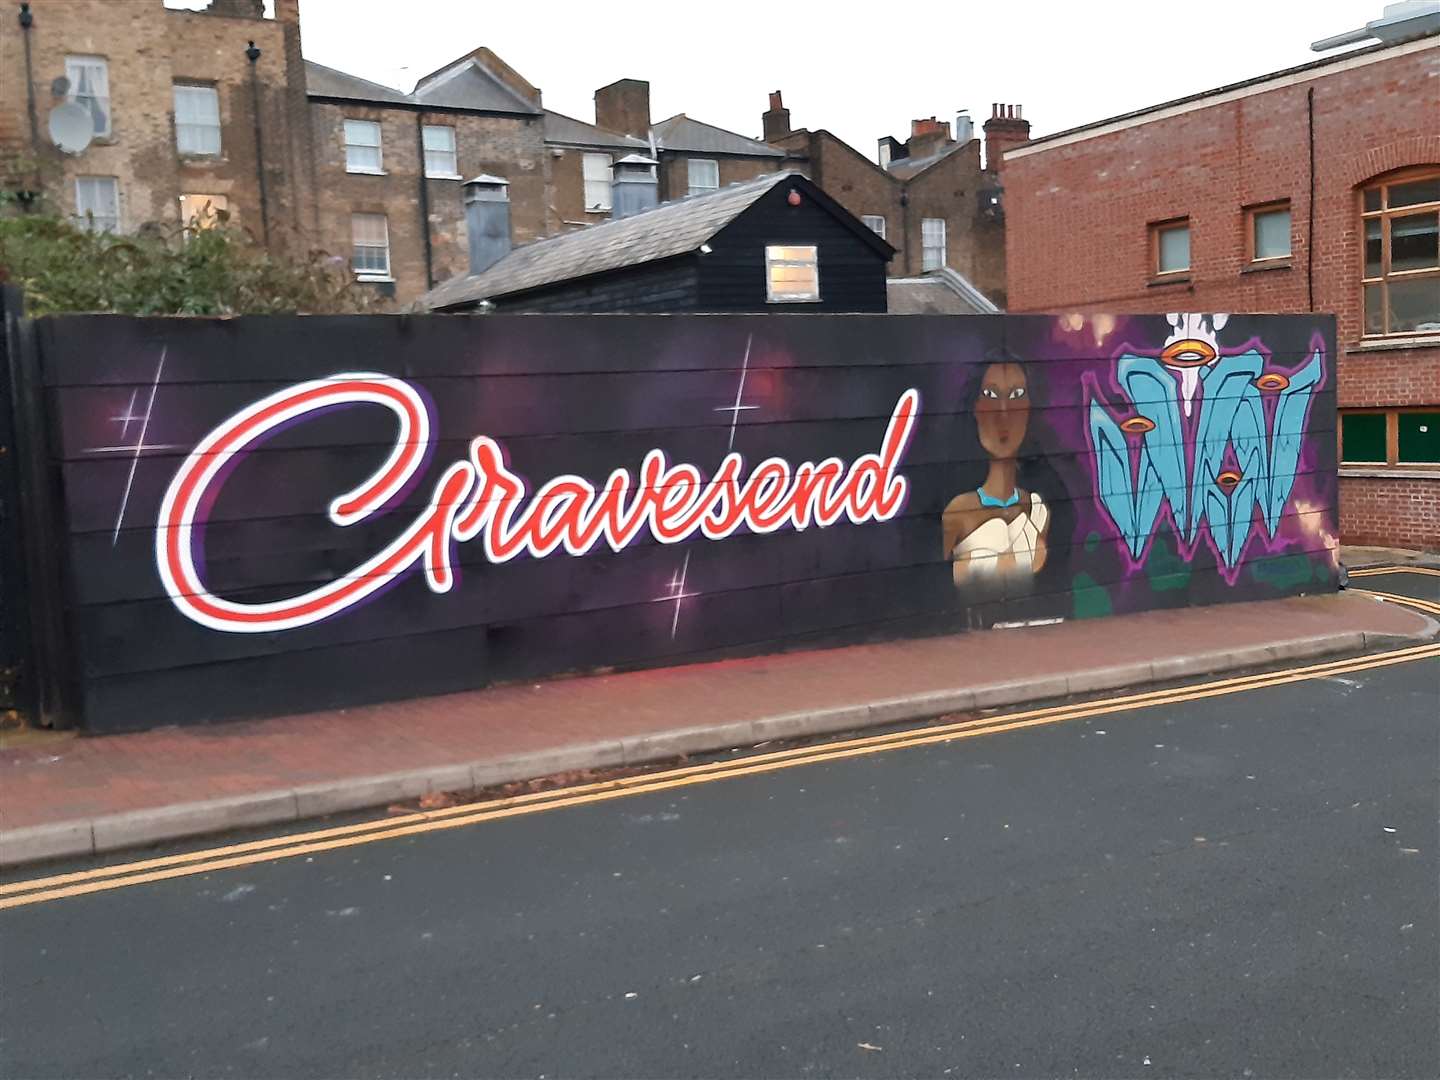 The mural has been received warmly by residents